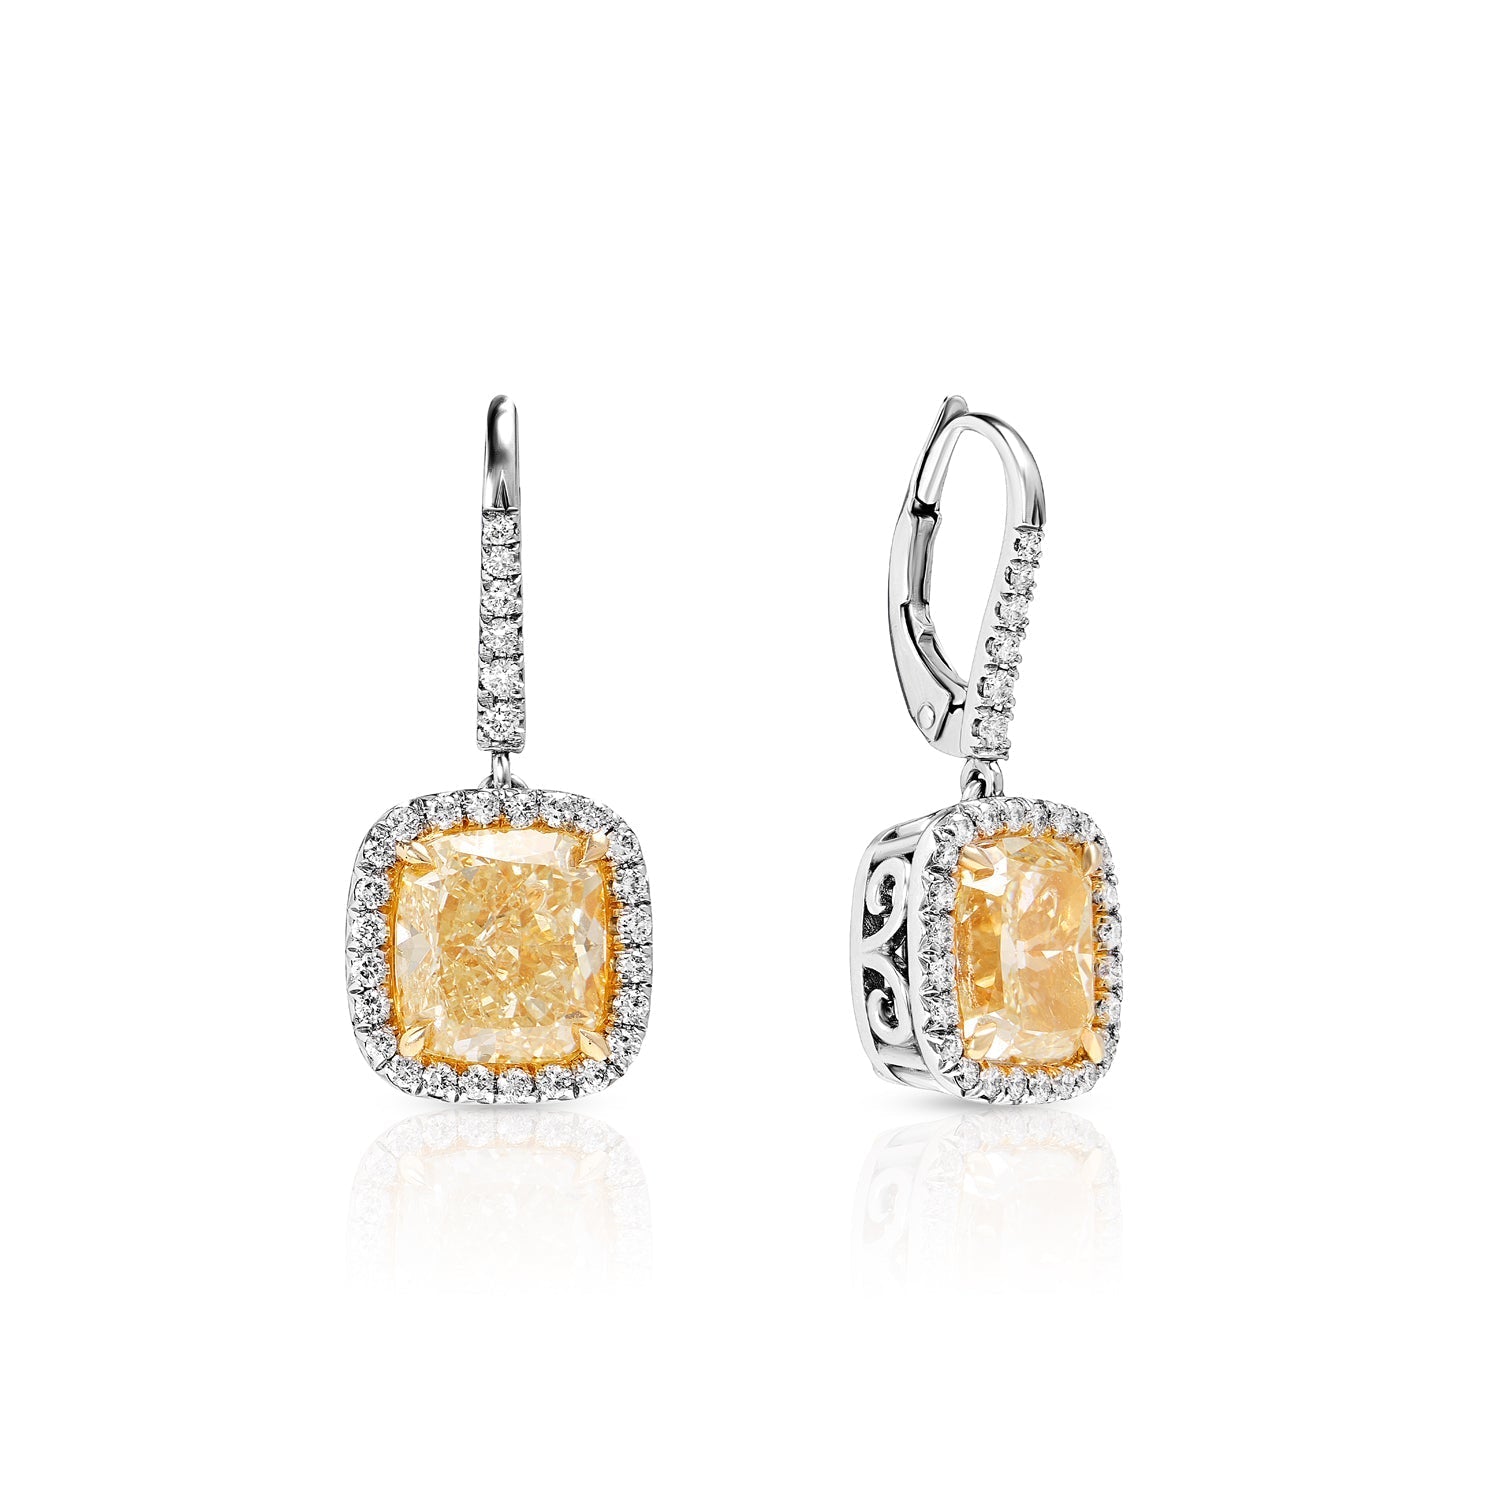 Amaia 7 Carat Yellow Cushion Cut Halo Diamond Leverback Hanging Earrings in Platinum Front and Side View